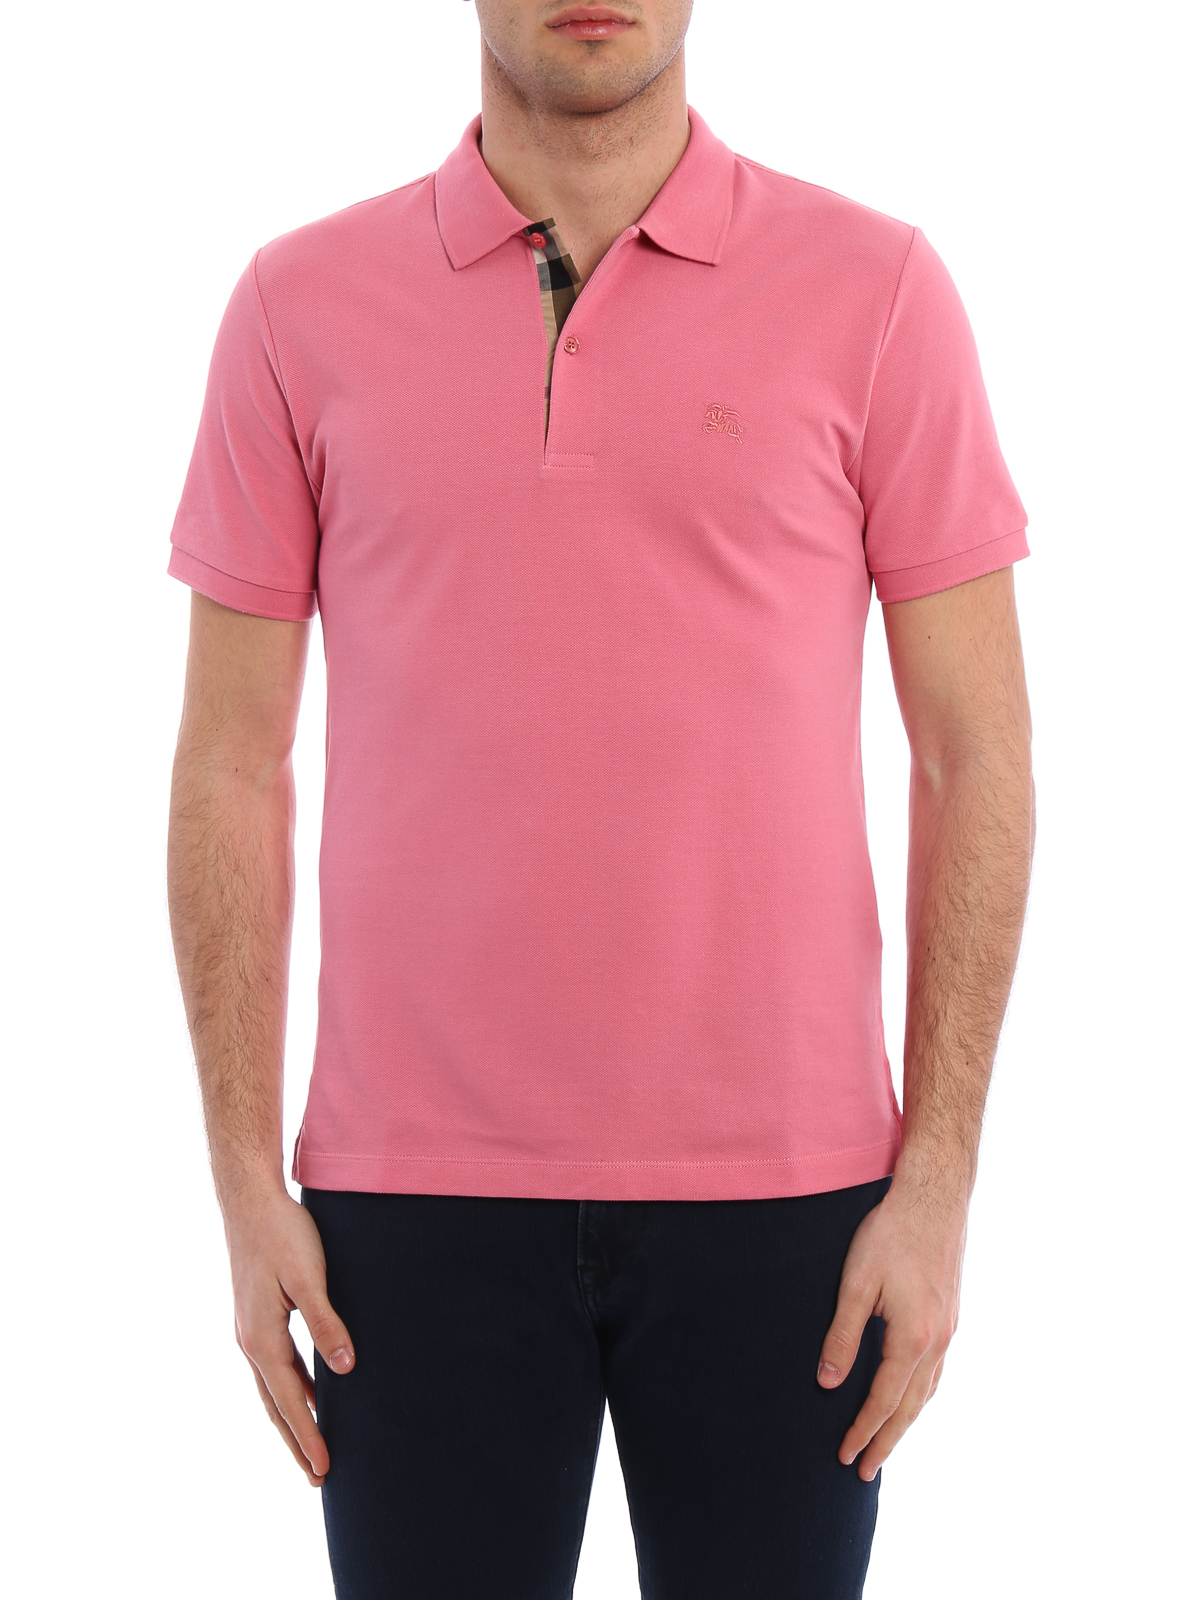 Burberry Check Placket Polo Shirt in Pink for Men